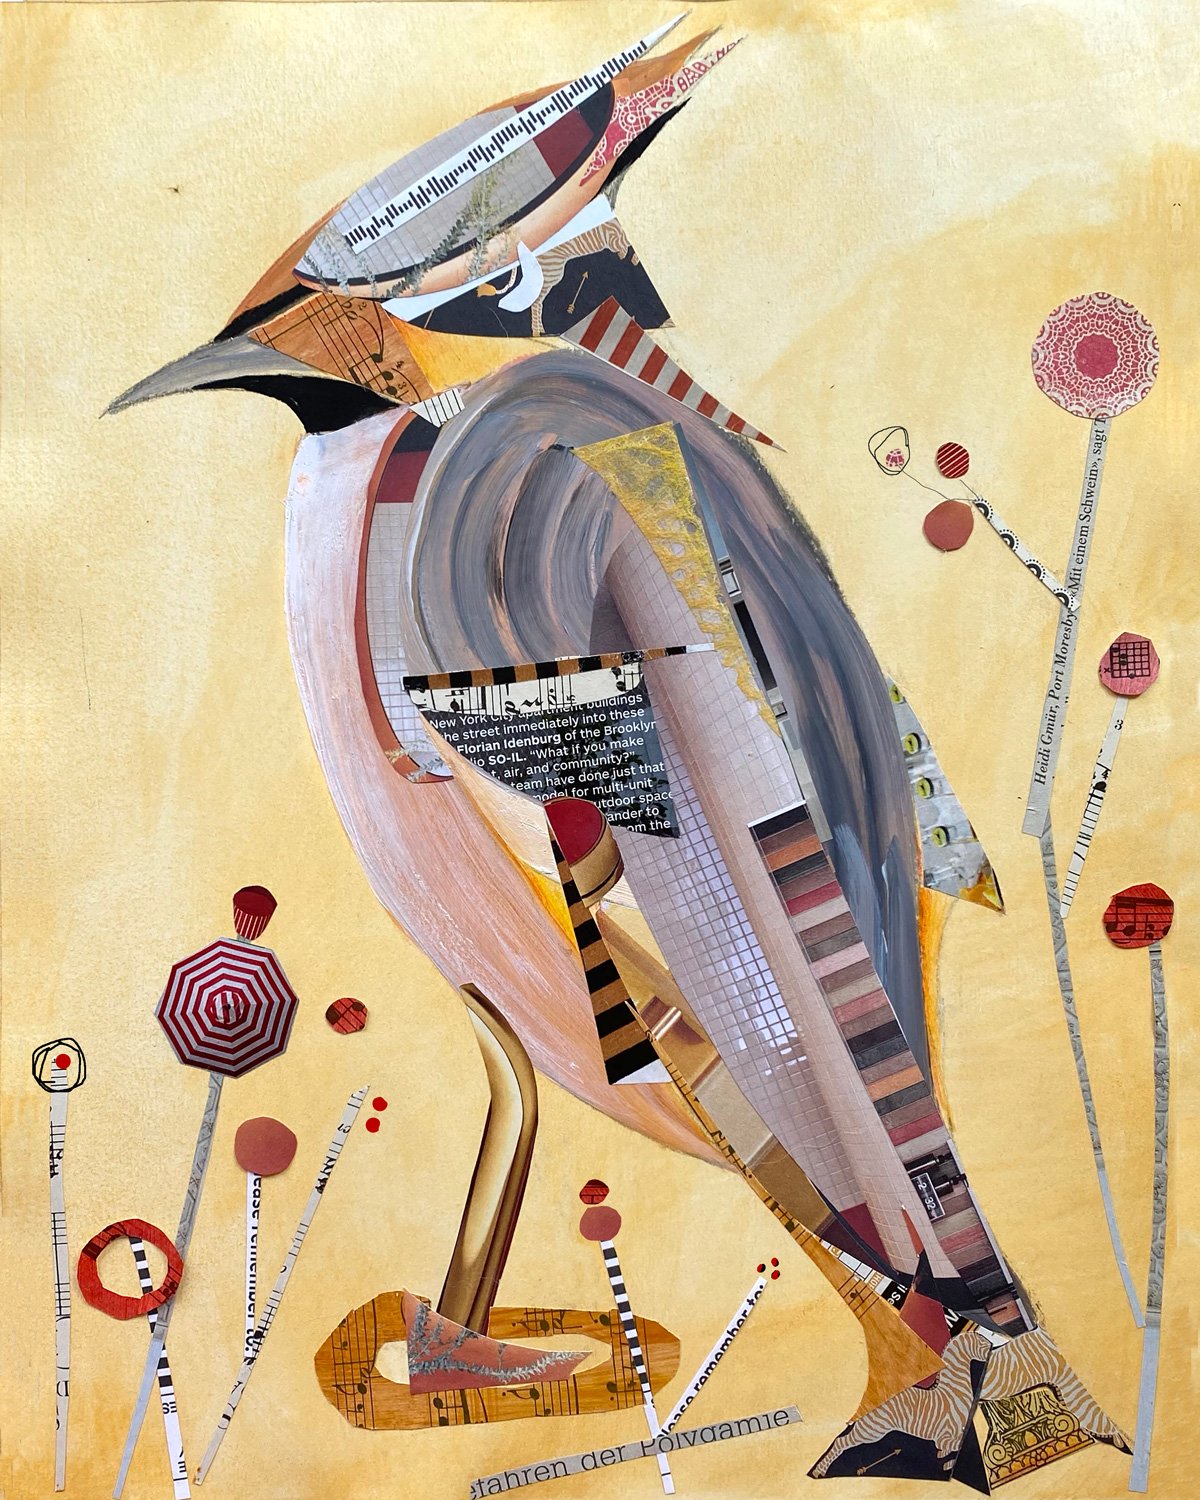 Bohemian-waxwing-resized-and-finished-hi-res-print.jpg